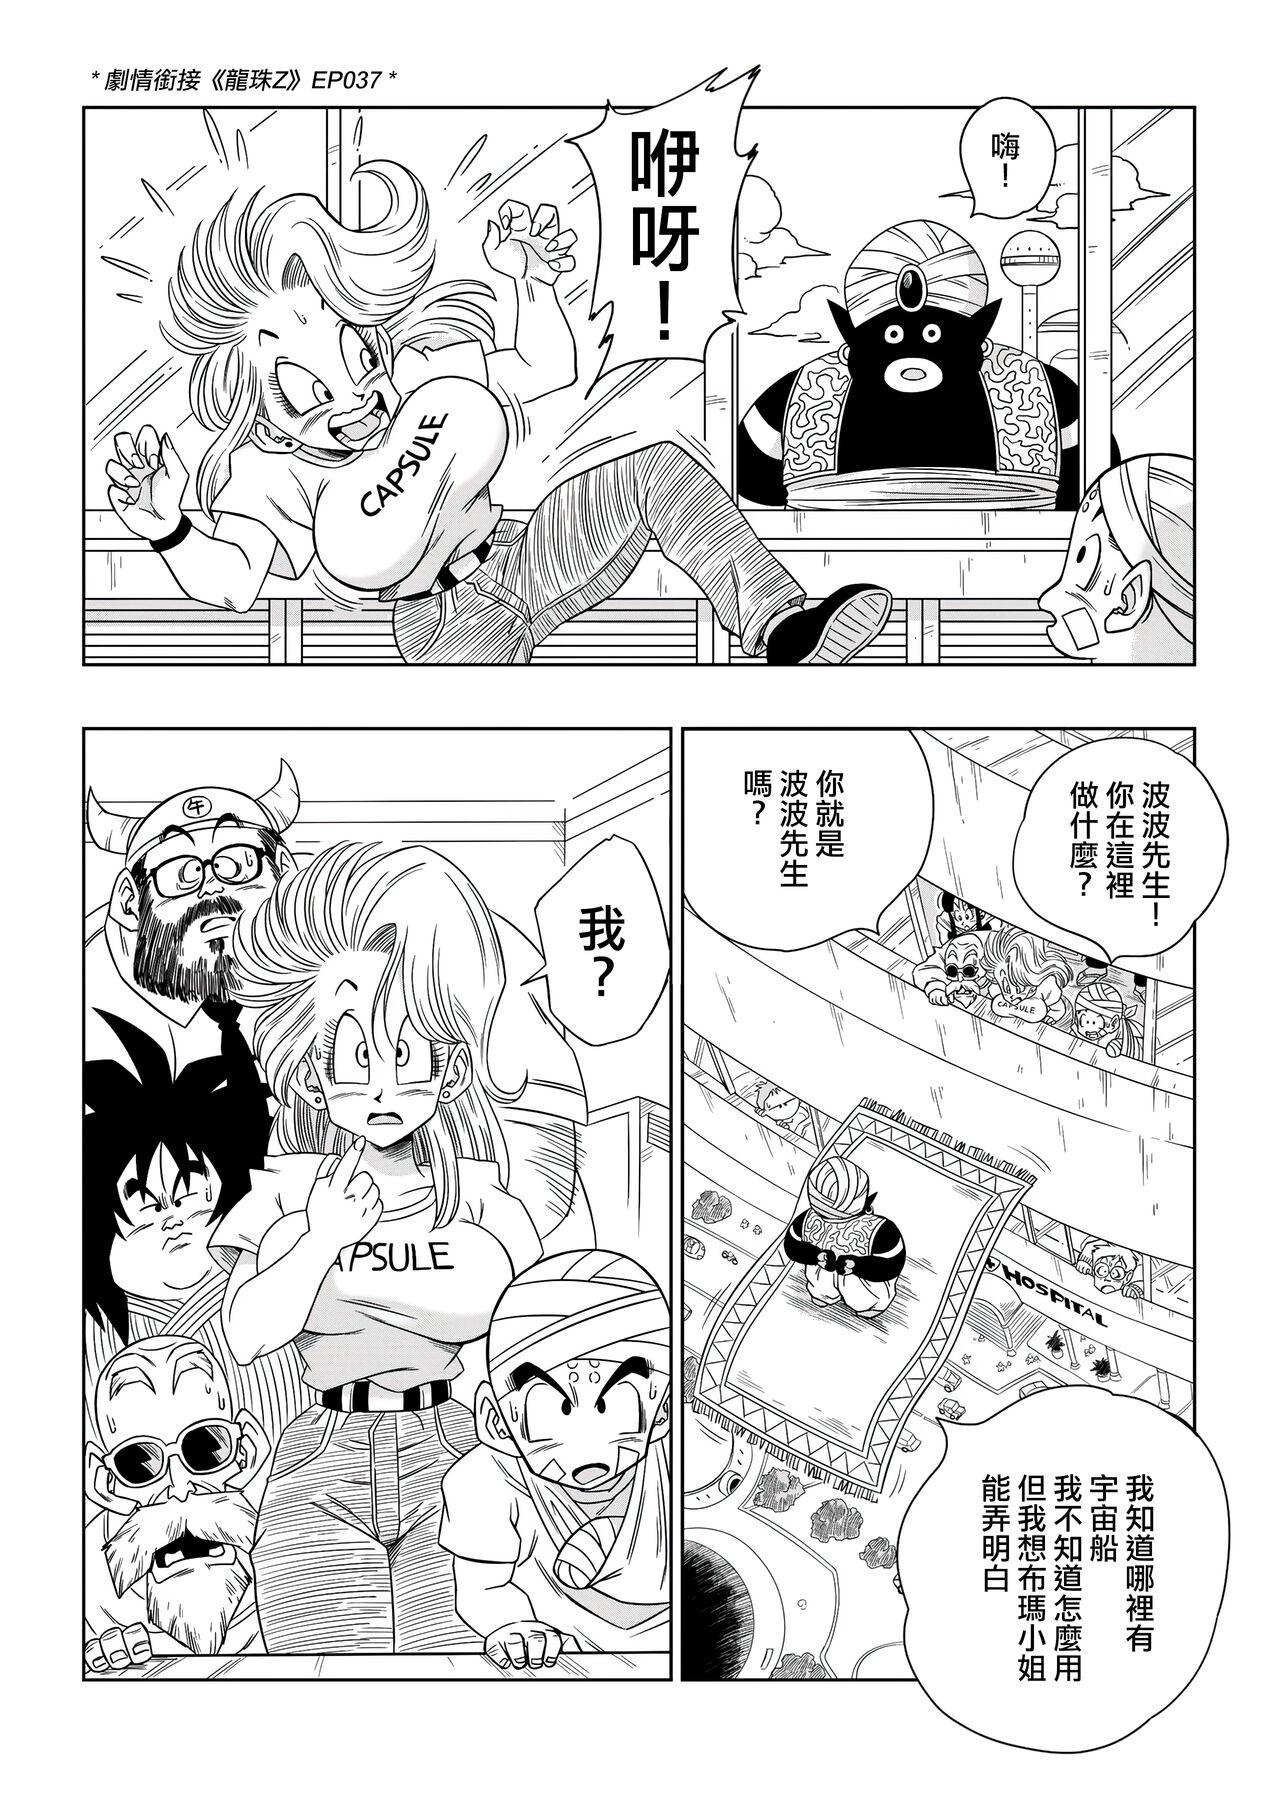 Cameltoe Bulma Meets Mr.Popo - Sex inside the Mysterious Spaceship! - Dragon ball z Daring - Picture 3